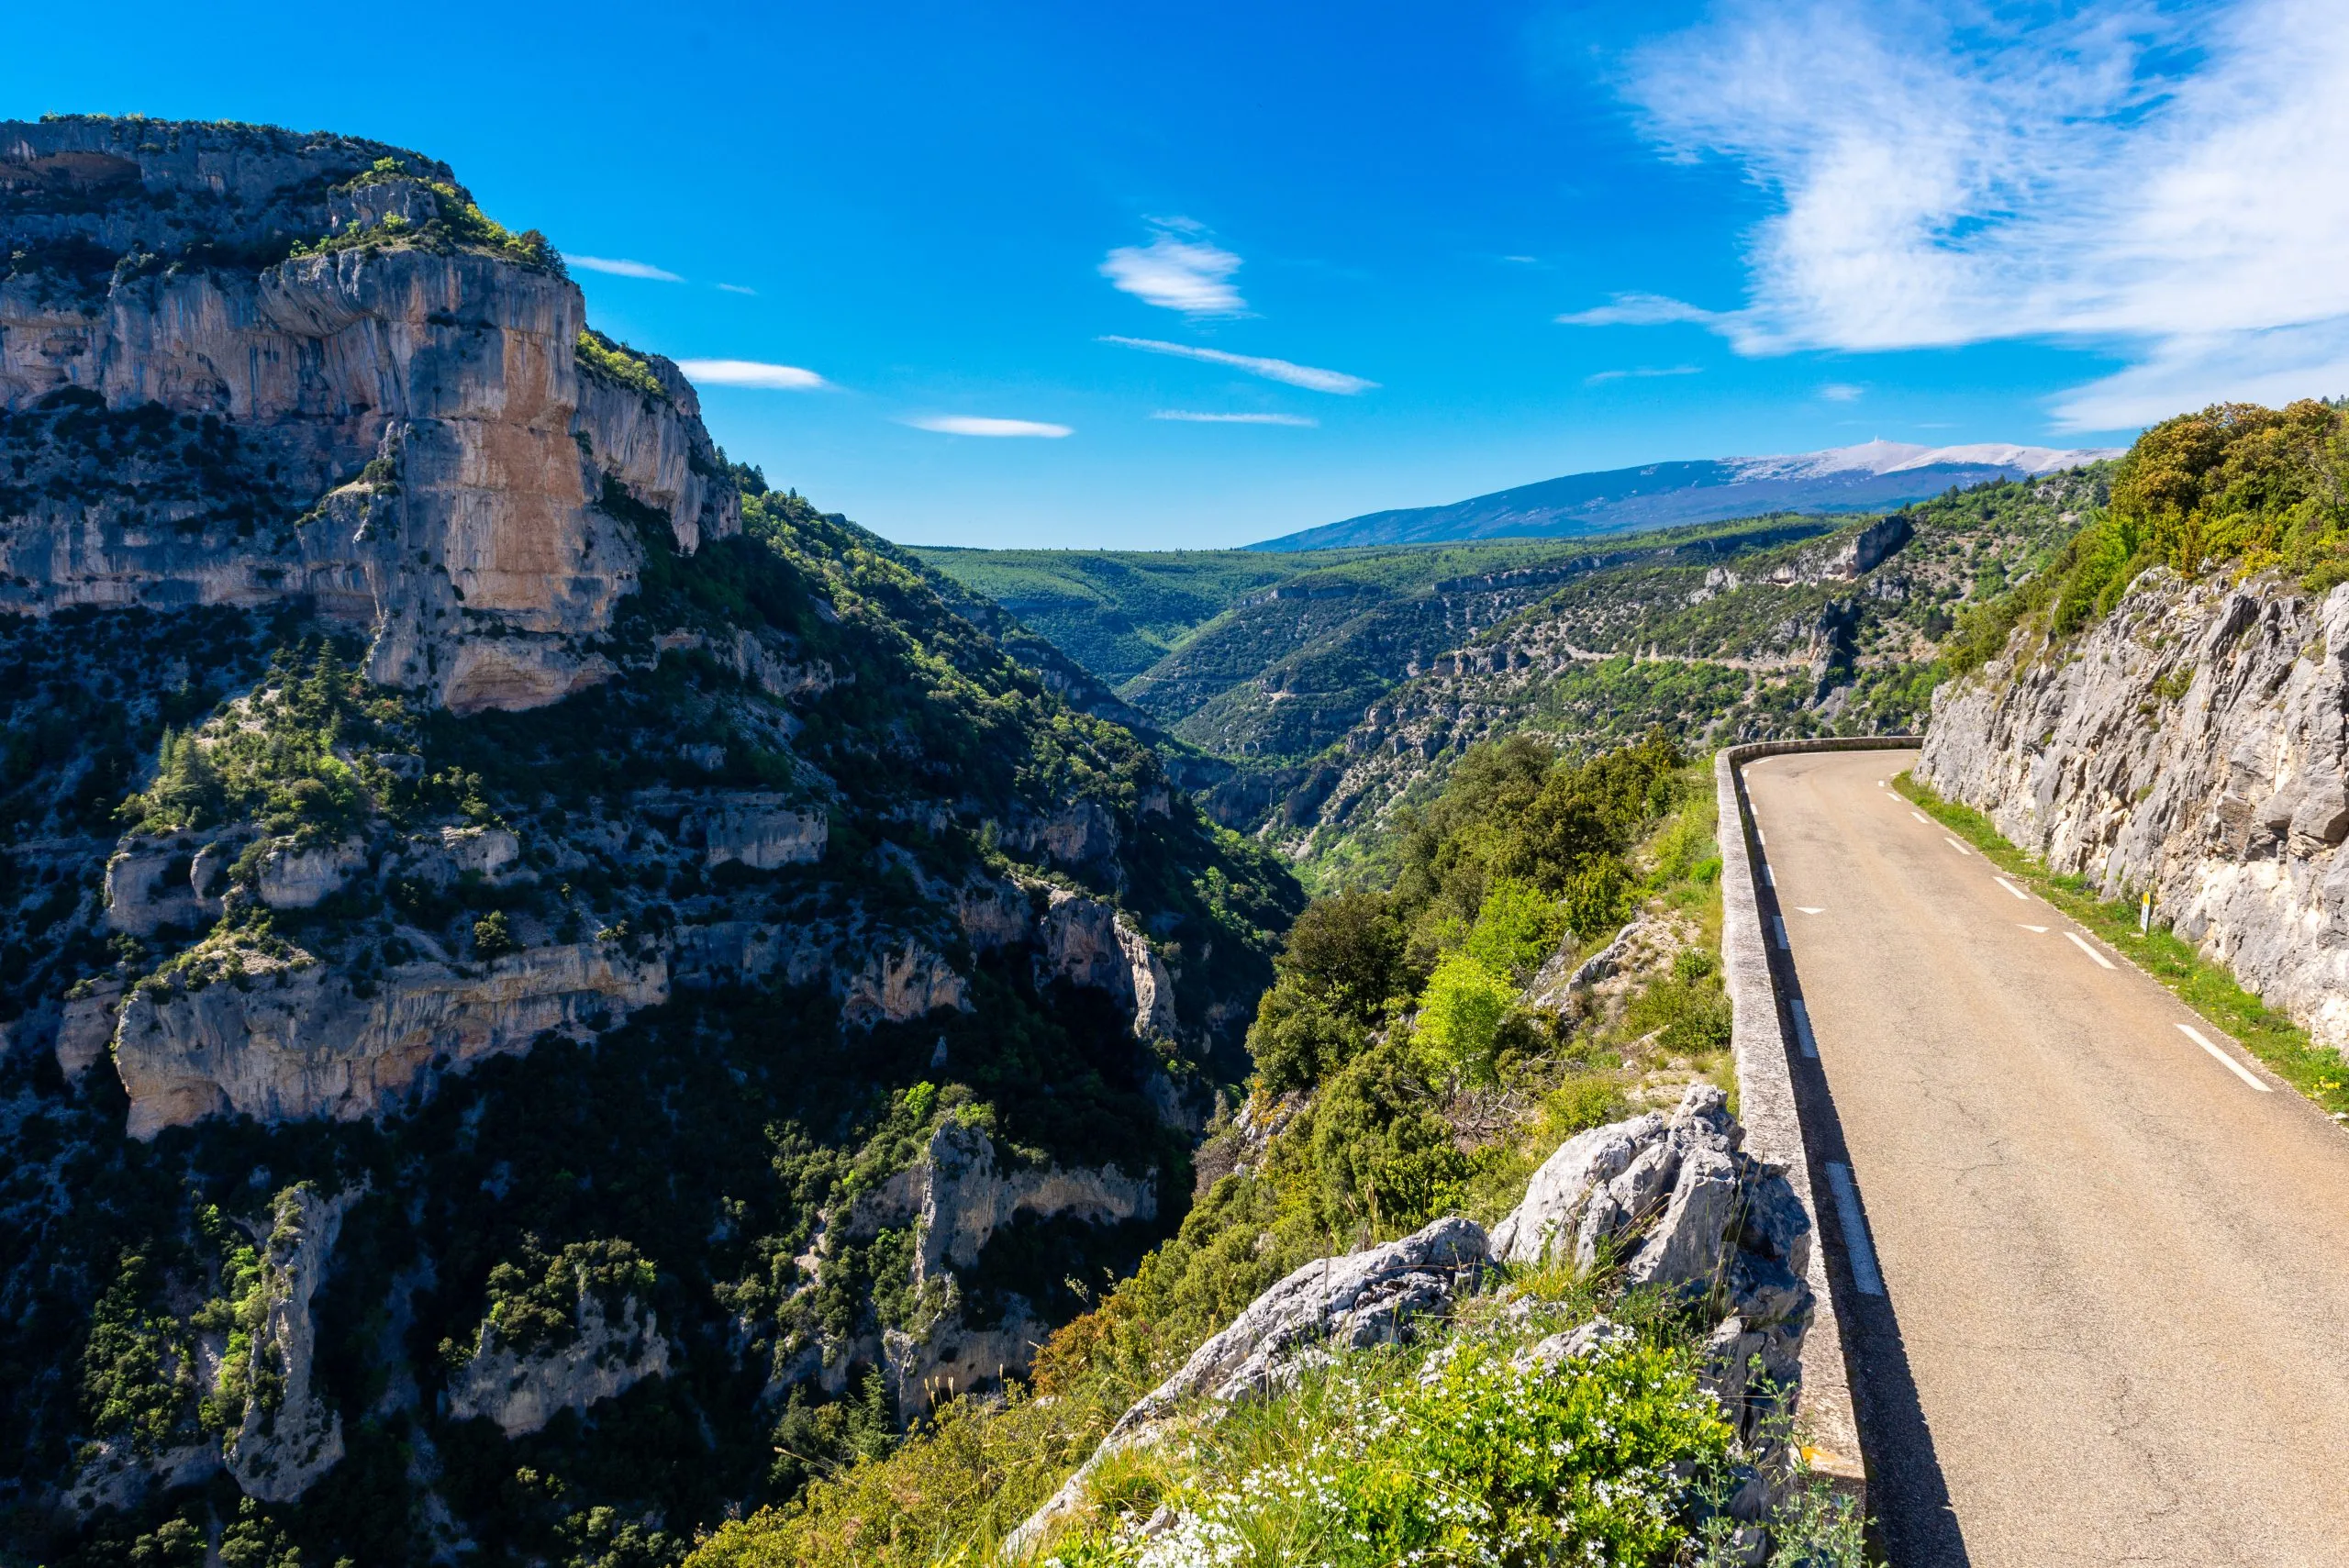 The Gorges de la Nesque is a canyon in the Vaucluse mountains that was created by the passage of the river Nesque.  The gorges forms part of the Mont Ventoux Biosphere Reserve. Some of the cliffs are over 200 metres high.